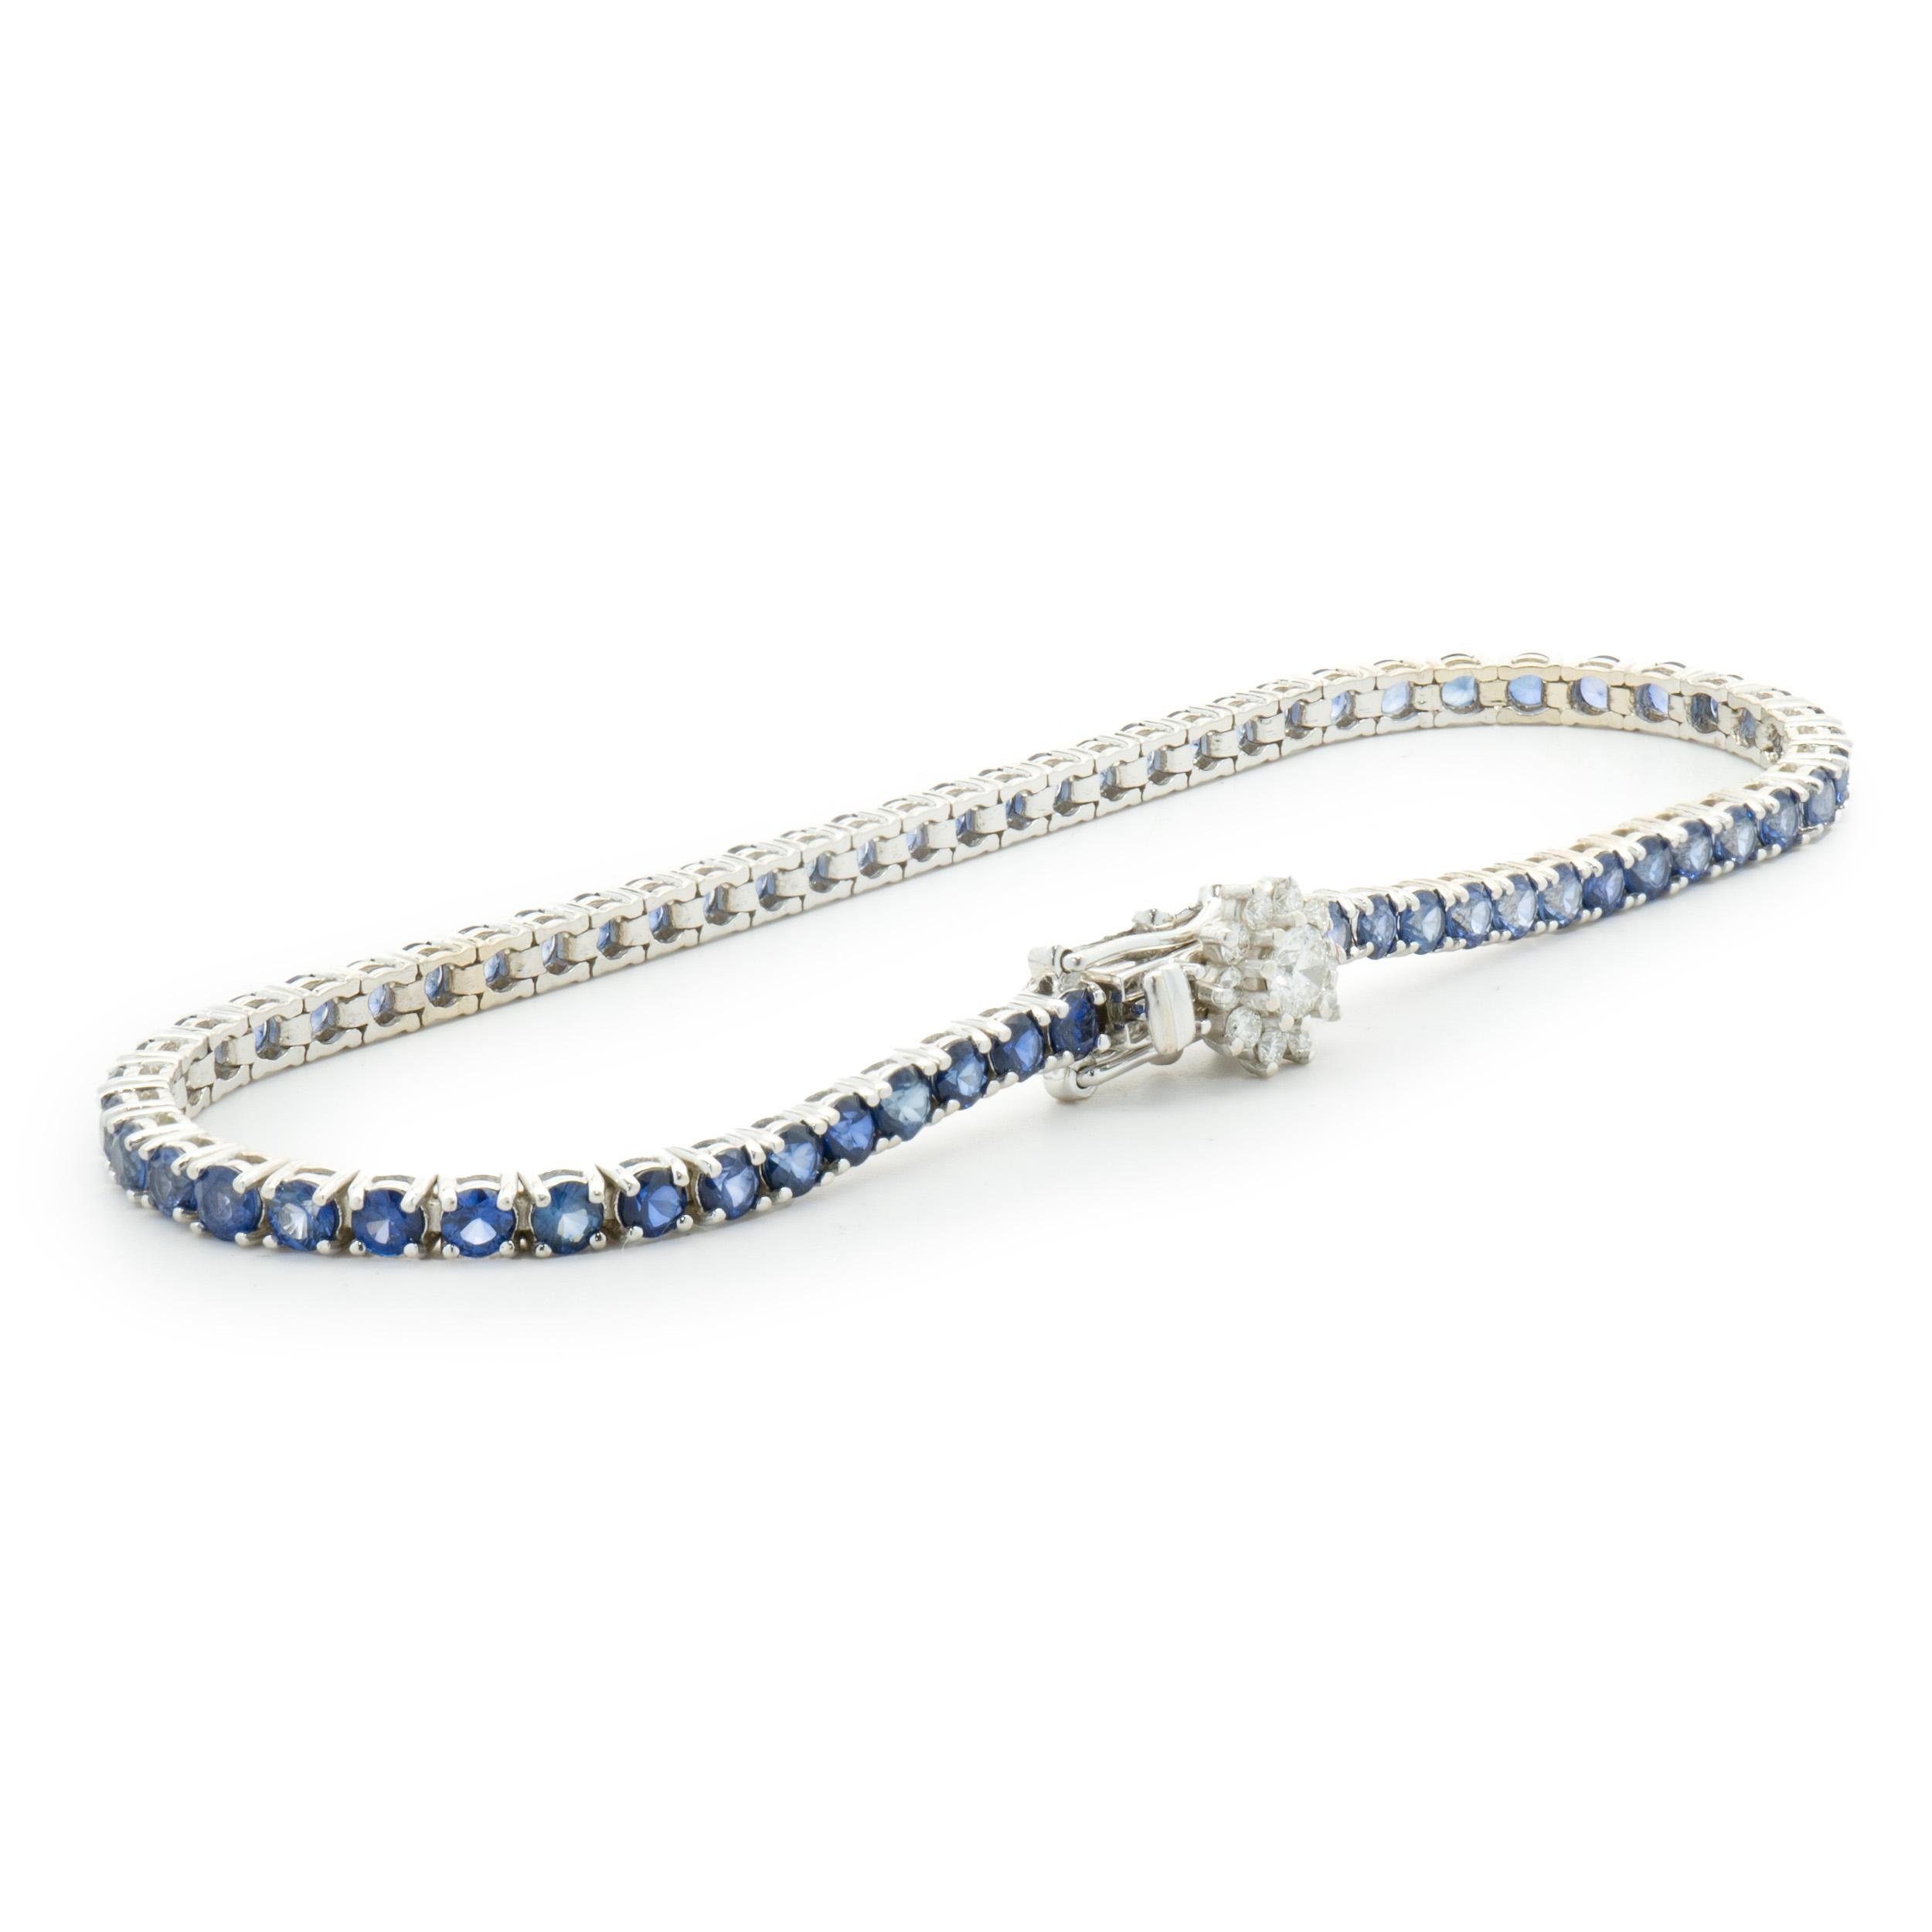 Designer: custom
Material: 14K white gold
Diamond: 11 round brilliant cut = 0.40cttw
Color: H
Clarity: SI1-2
Sapphire: 63 round cut = 5.04cttw
Weight: 7.94 grams
Dimensions: bracelet will fit up to a 7-inch wrist
